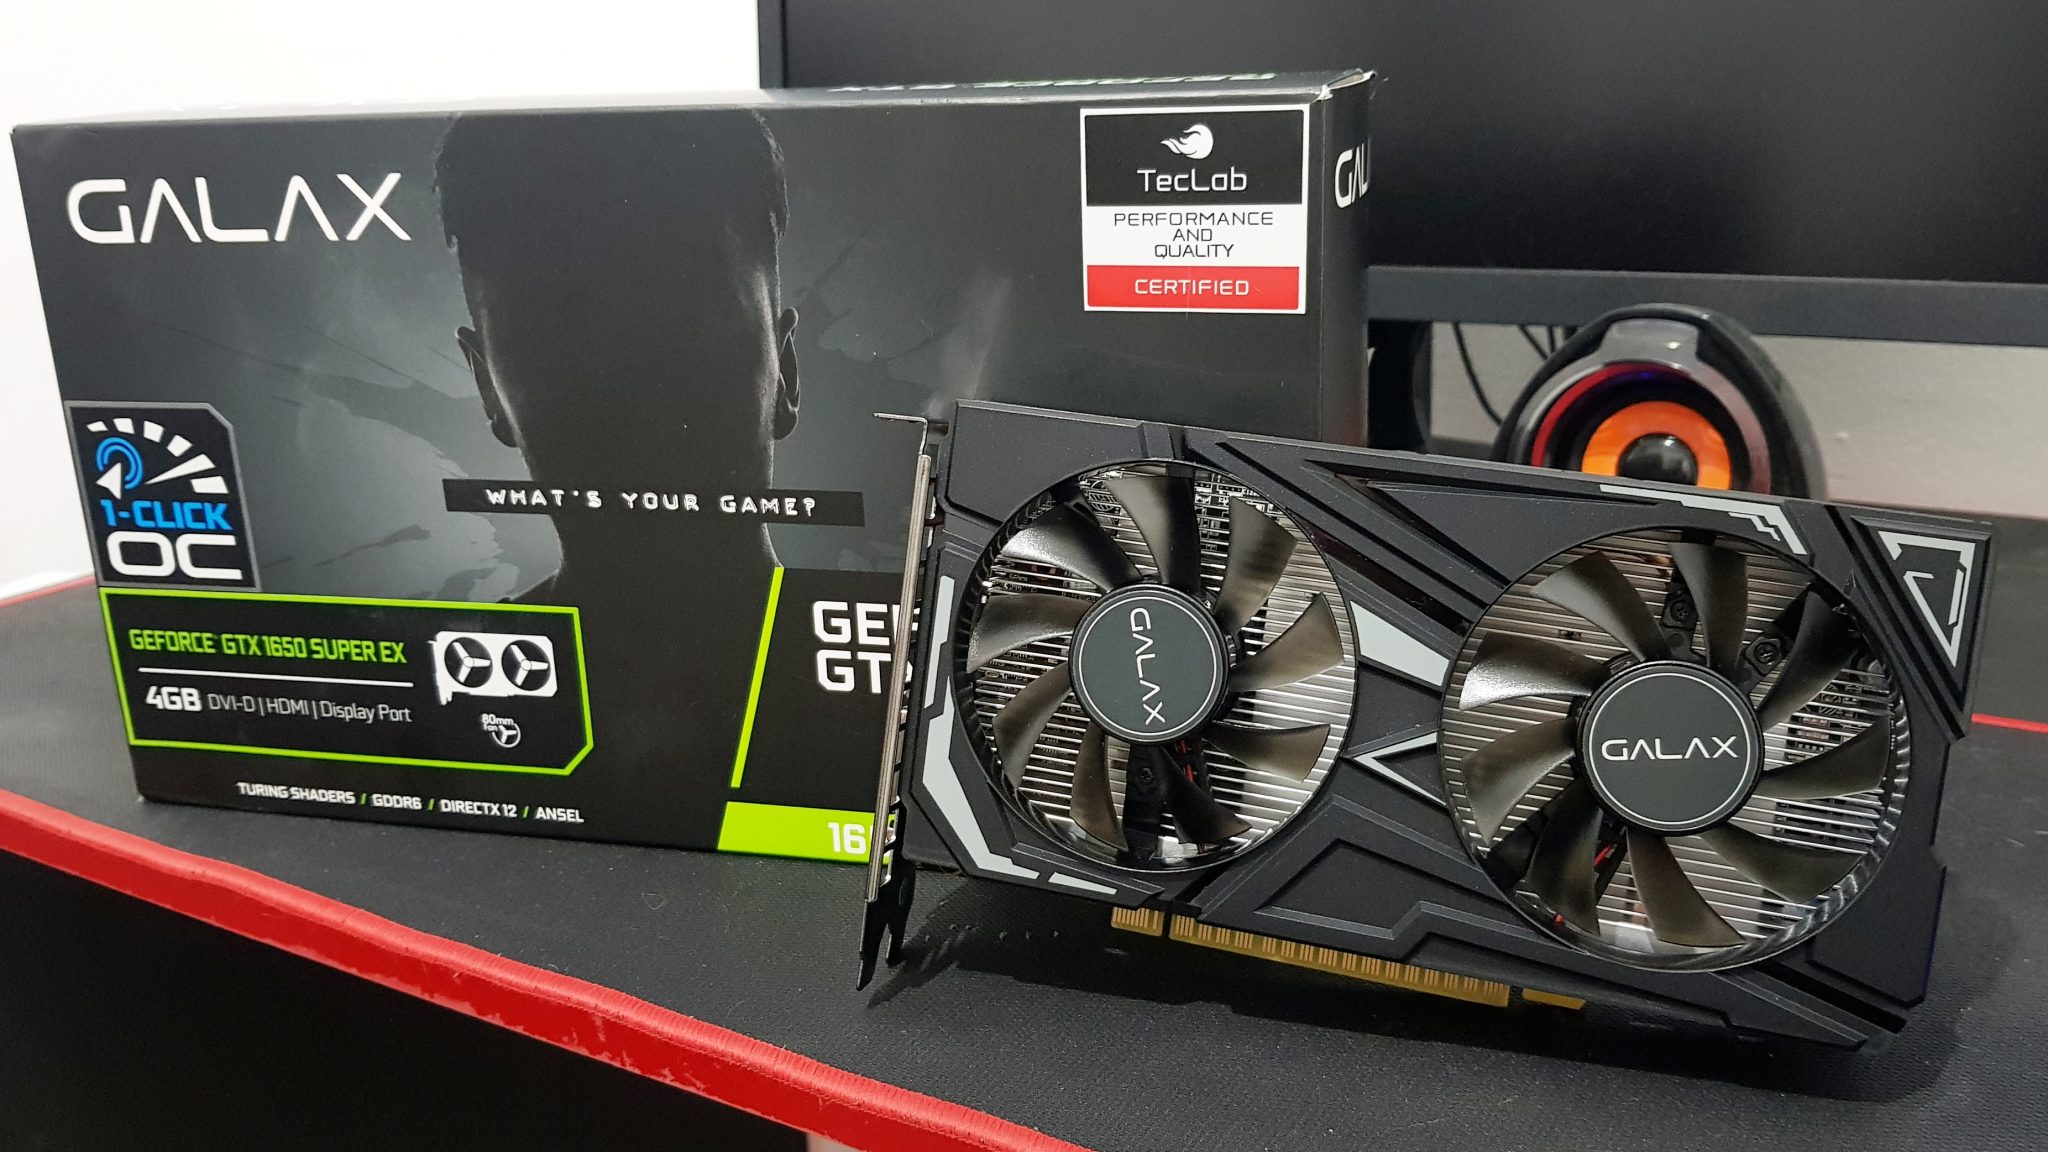 REVIEW: GALAX GeForce GTX 1650 Super EX brings high performance in the entry segment